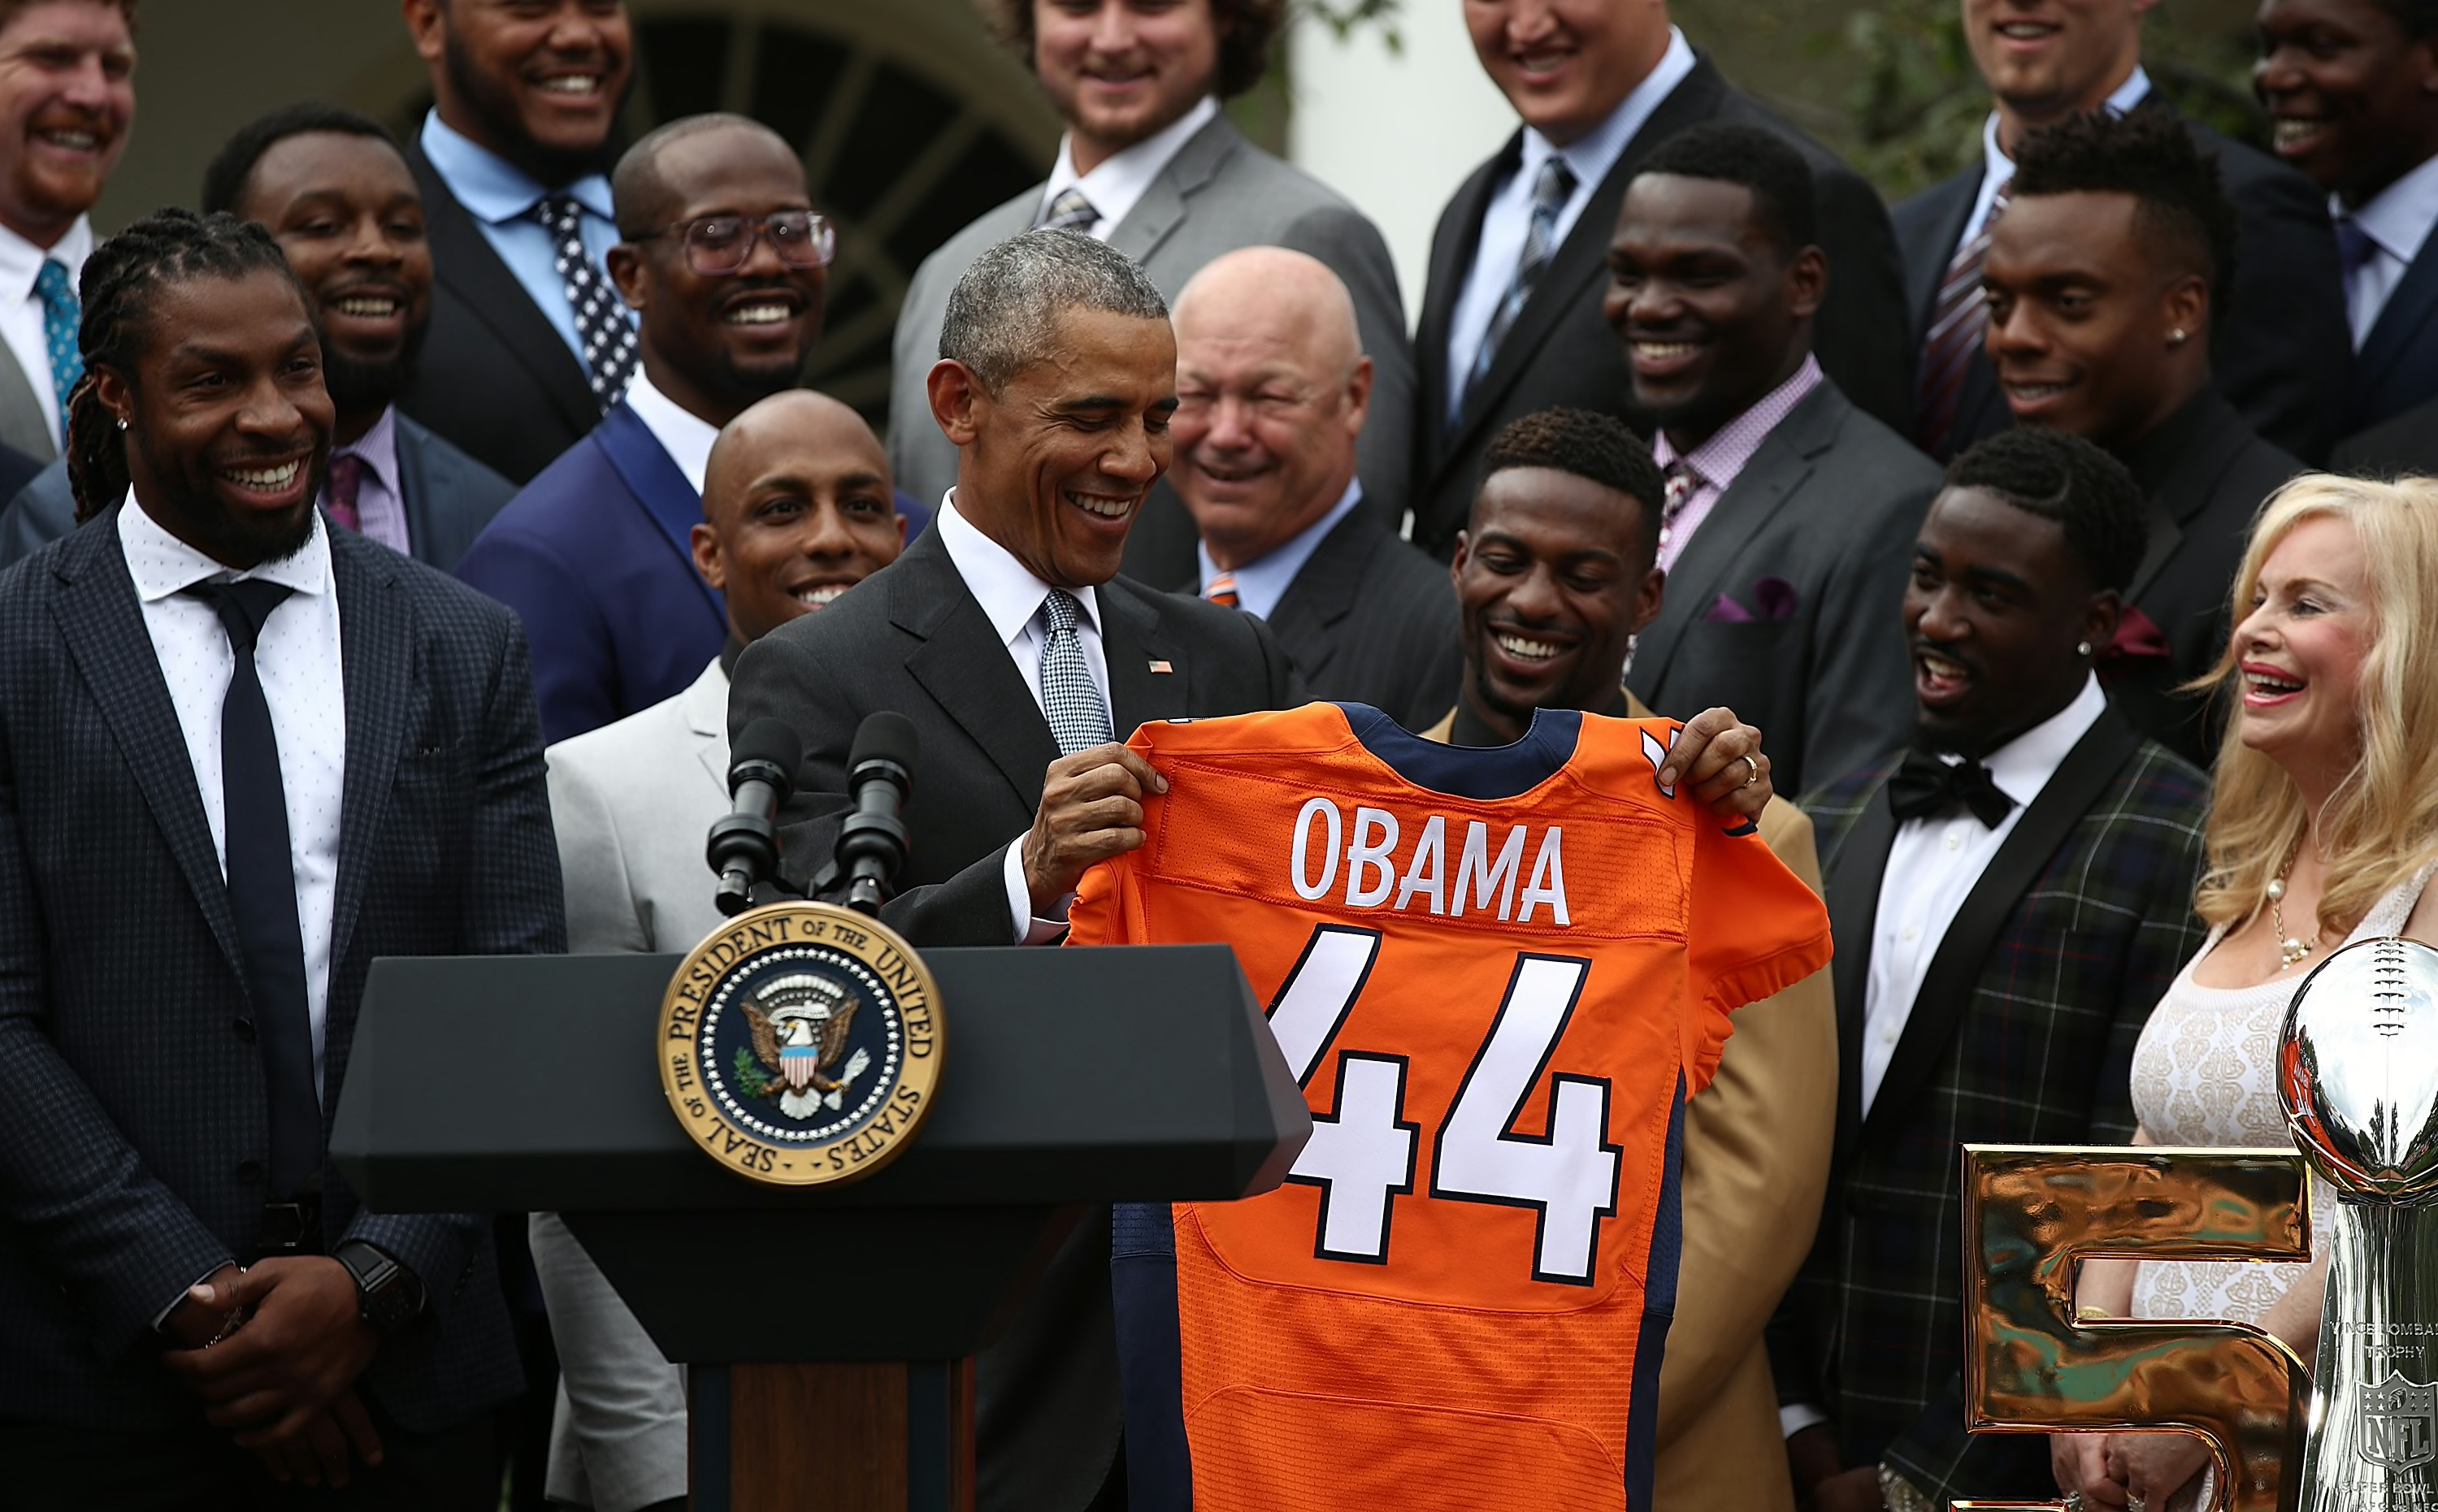 Comparing All-Time Great NFL Quarterbacks To American Presidents